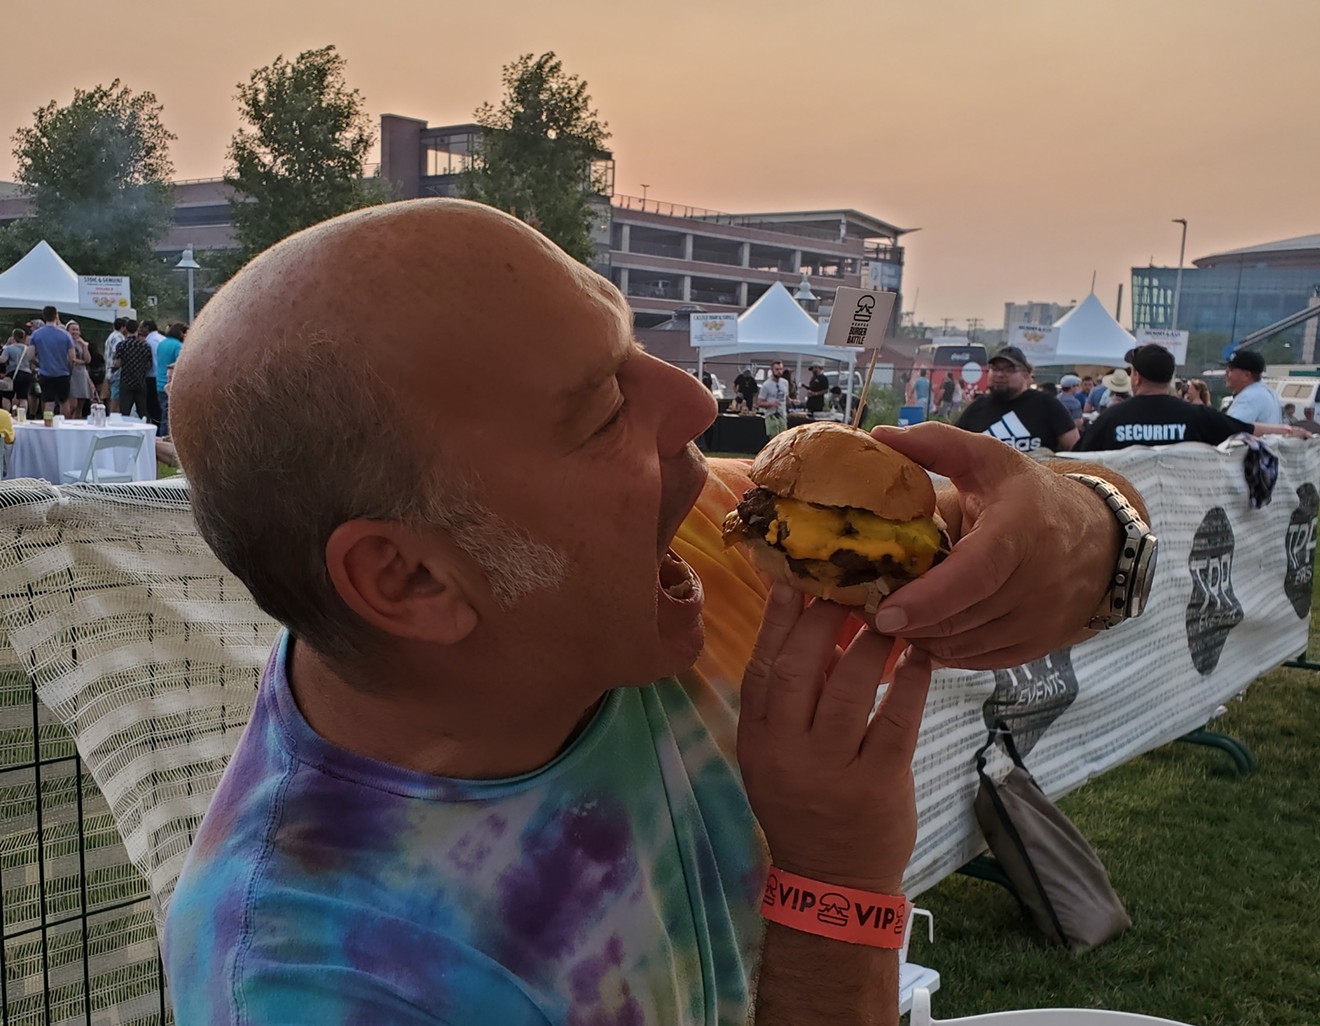 Jimmy "Snarf" Siedel, founder of Snarf's and Snarfburger, took home the Judge's Choice prize at the 2021 Denver Burger Battle.